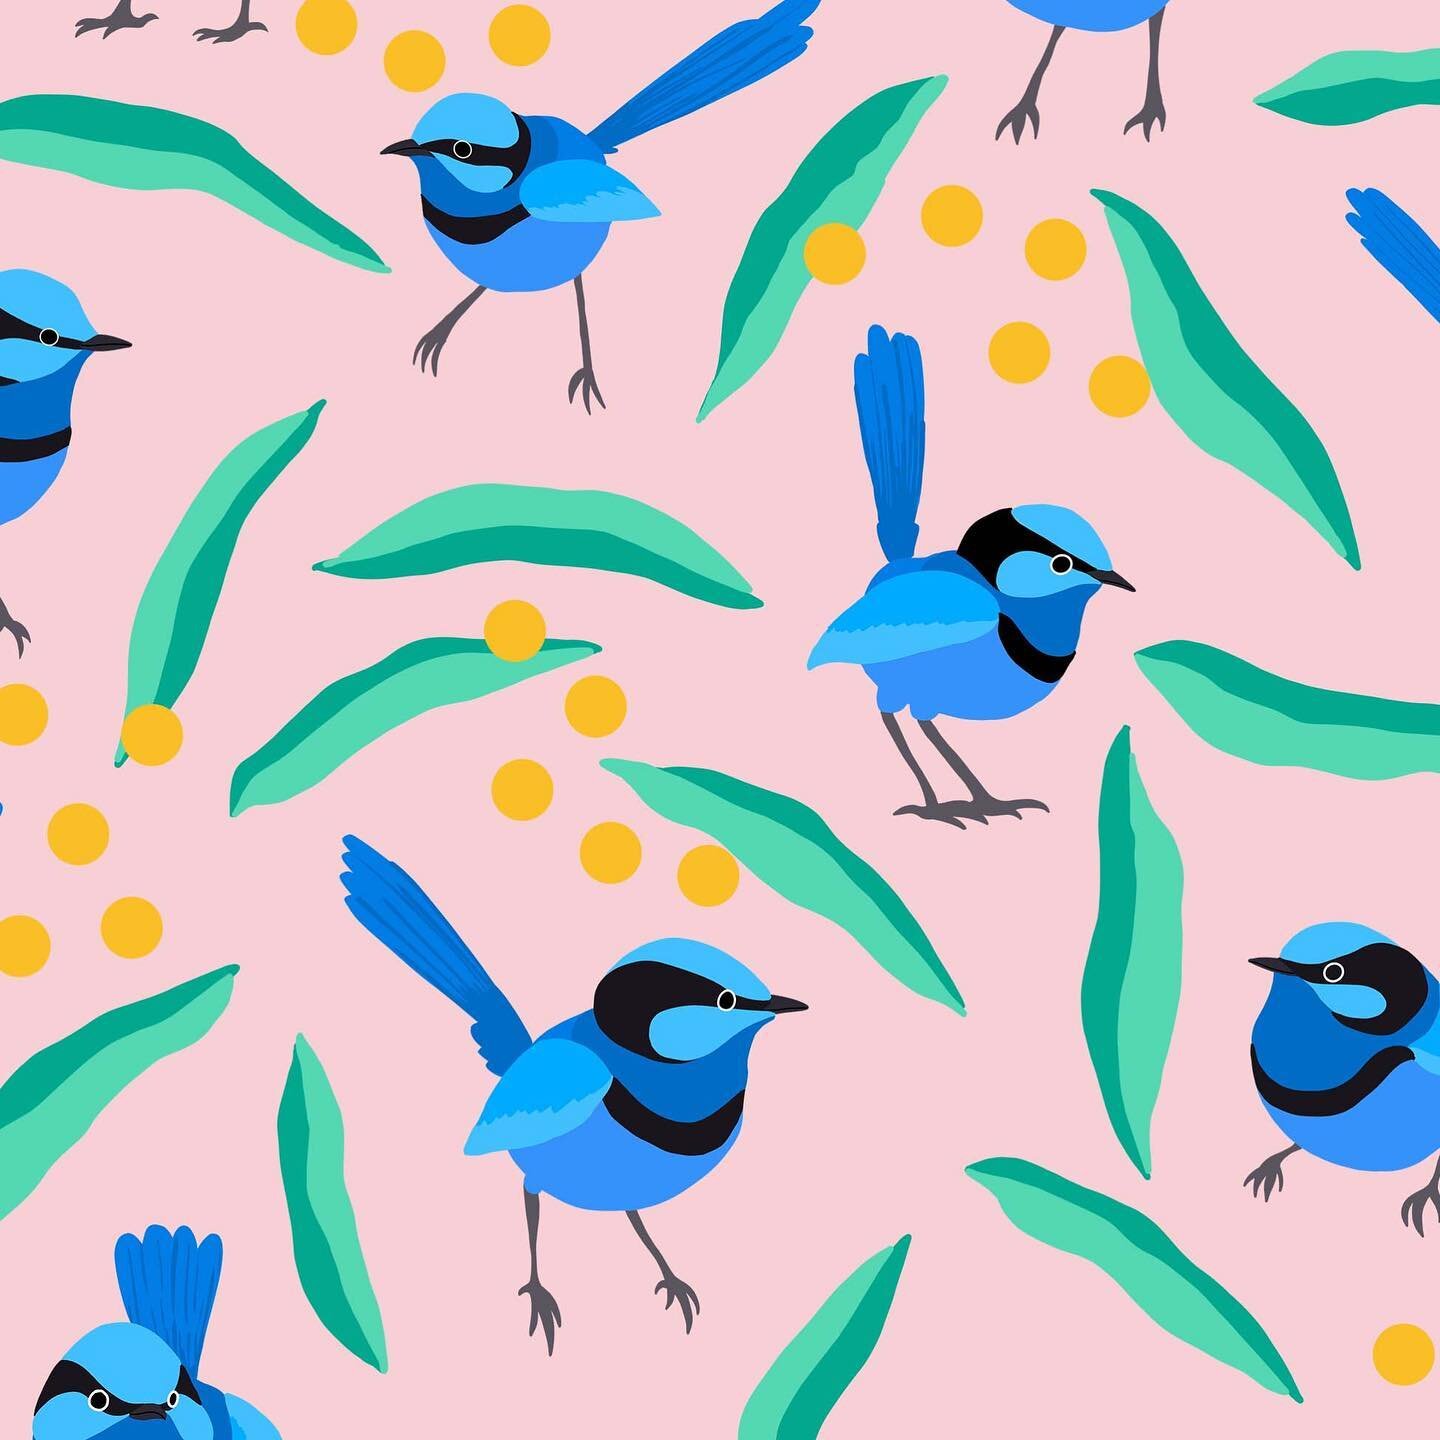 Sharing my design for the birding Spoonflower challenge! I loved drawing these splendid fairy wrens, wattle and gum leaves! Any challenge which includes birds I&rsquo;m down for 😂

[ID: a repeating pattern of bold, graphic splendid fairy wrens, surr